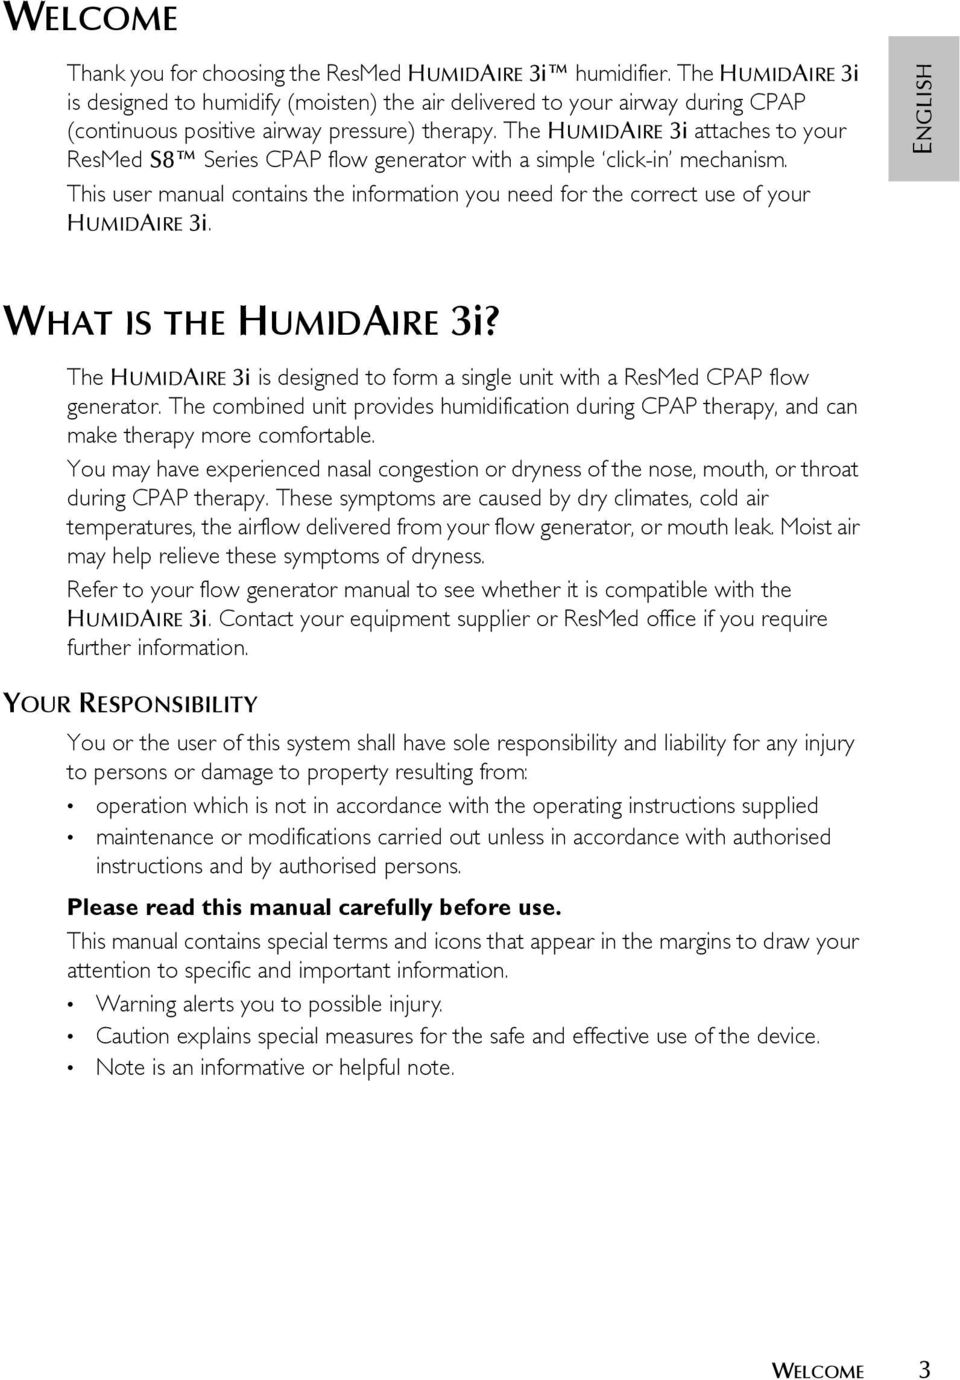 The HUMIDAIRE 3i attaches to your ResMed S8 Series CPAP flow generator with a simple click-in mechanism. This user manual contains the information you need for the correct use of your HUMIDAIRE 3i.